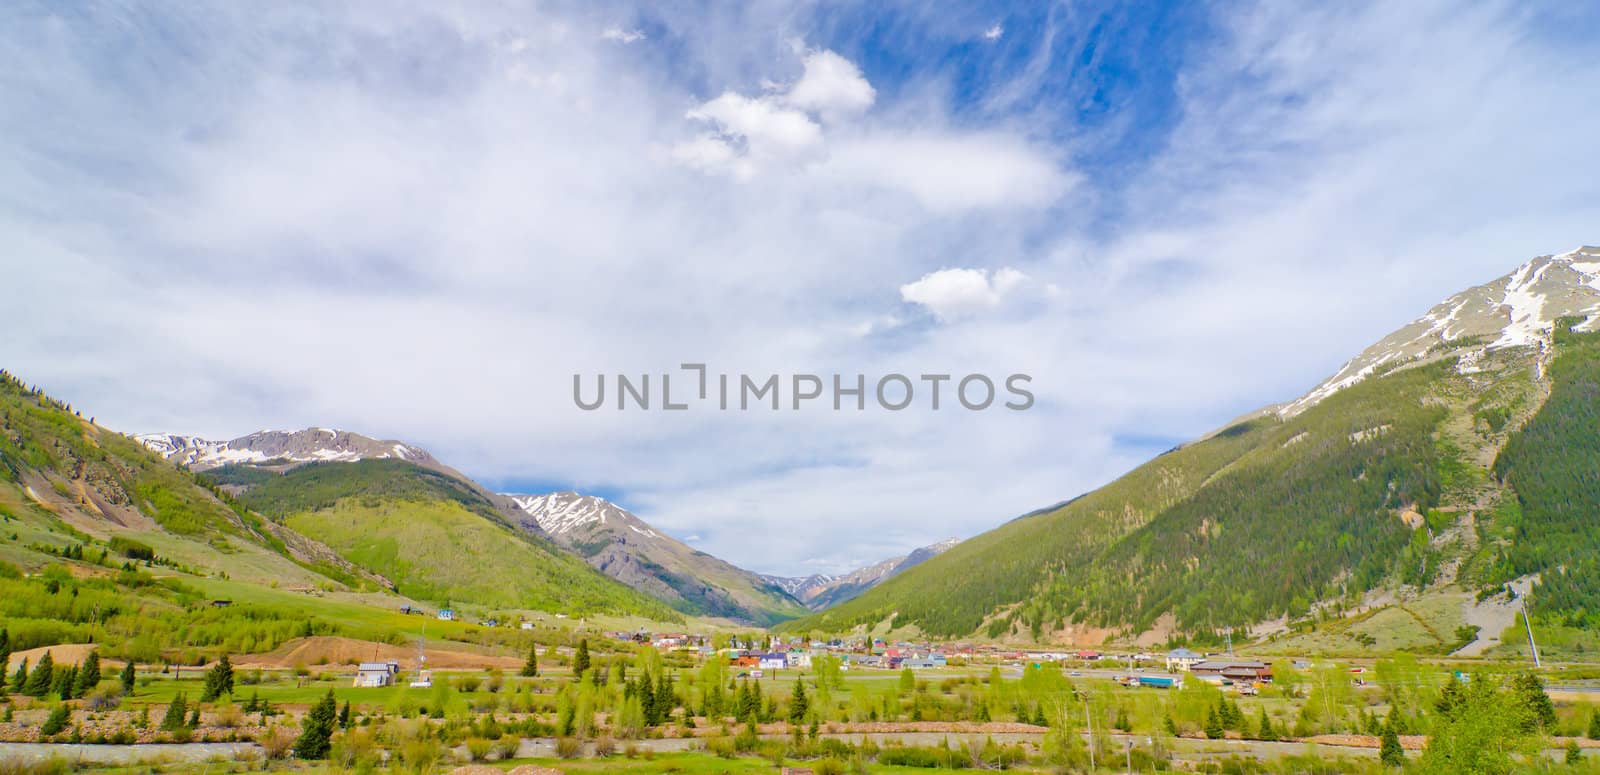 The City of Silverton nestled in the San Juan Mountains in Colorado